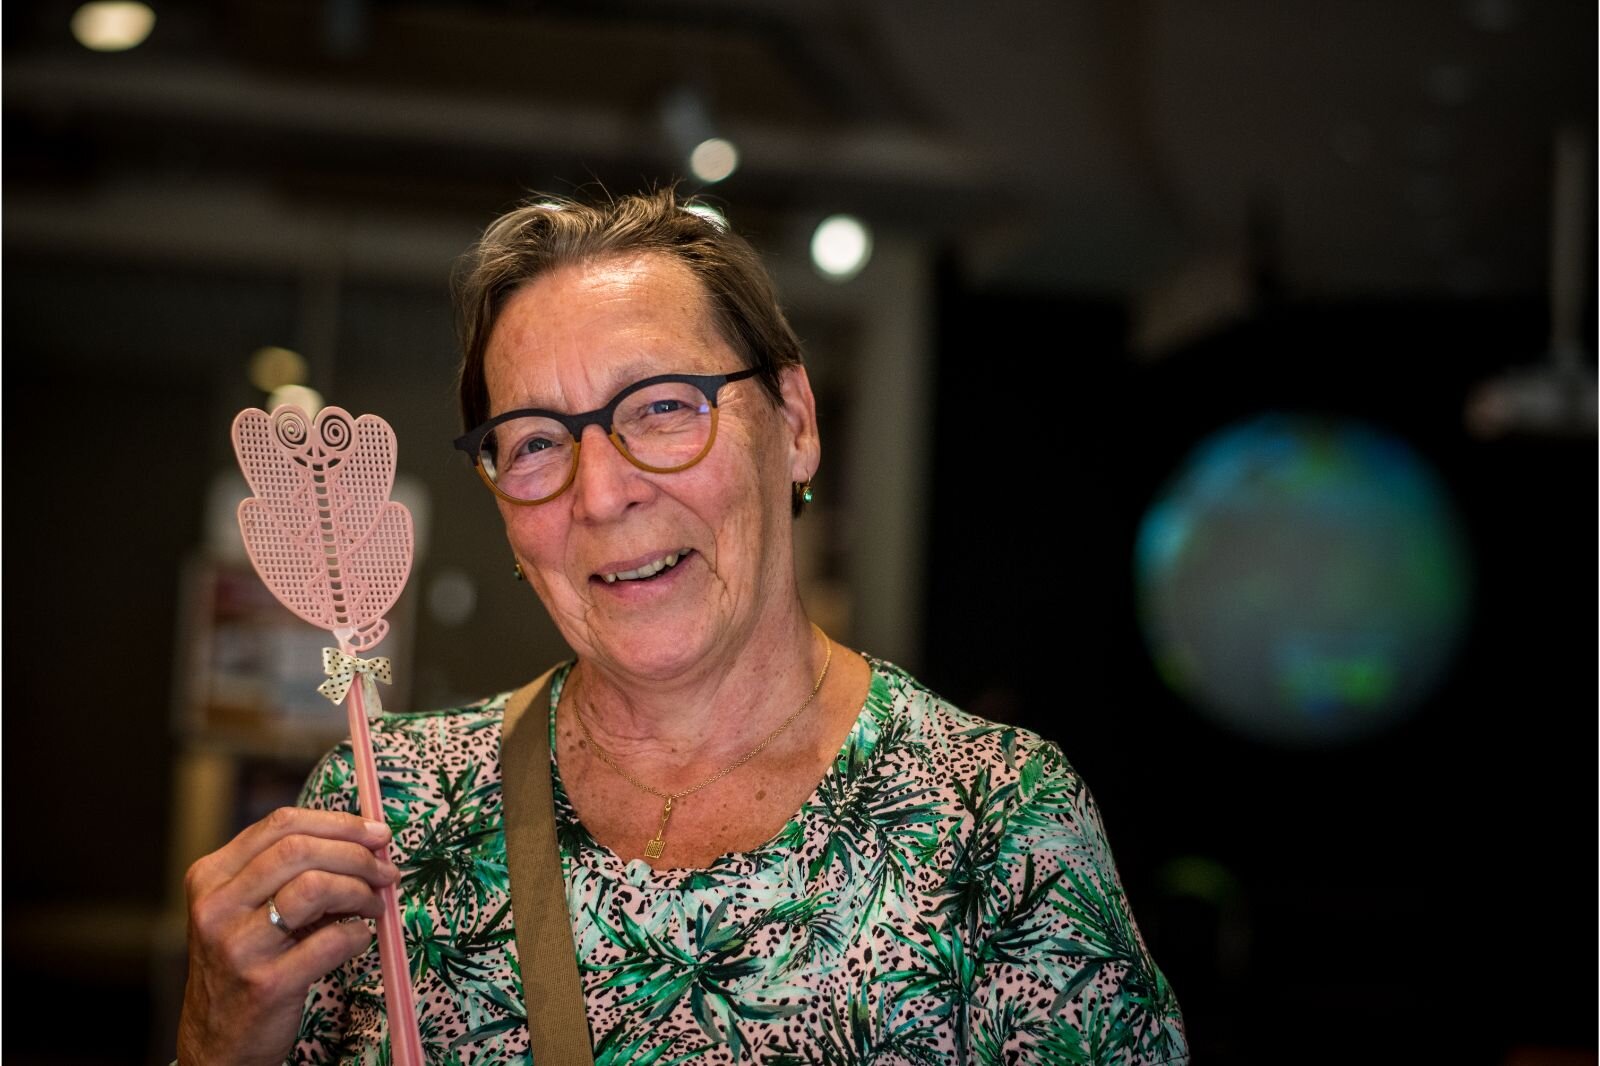 van Riemsdijk holds a flyswatter from Japan, the first in her collection.